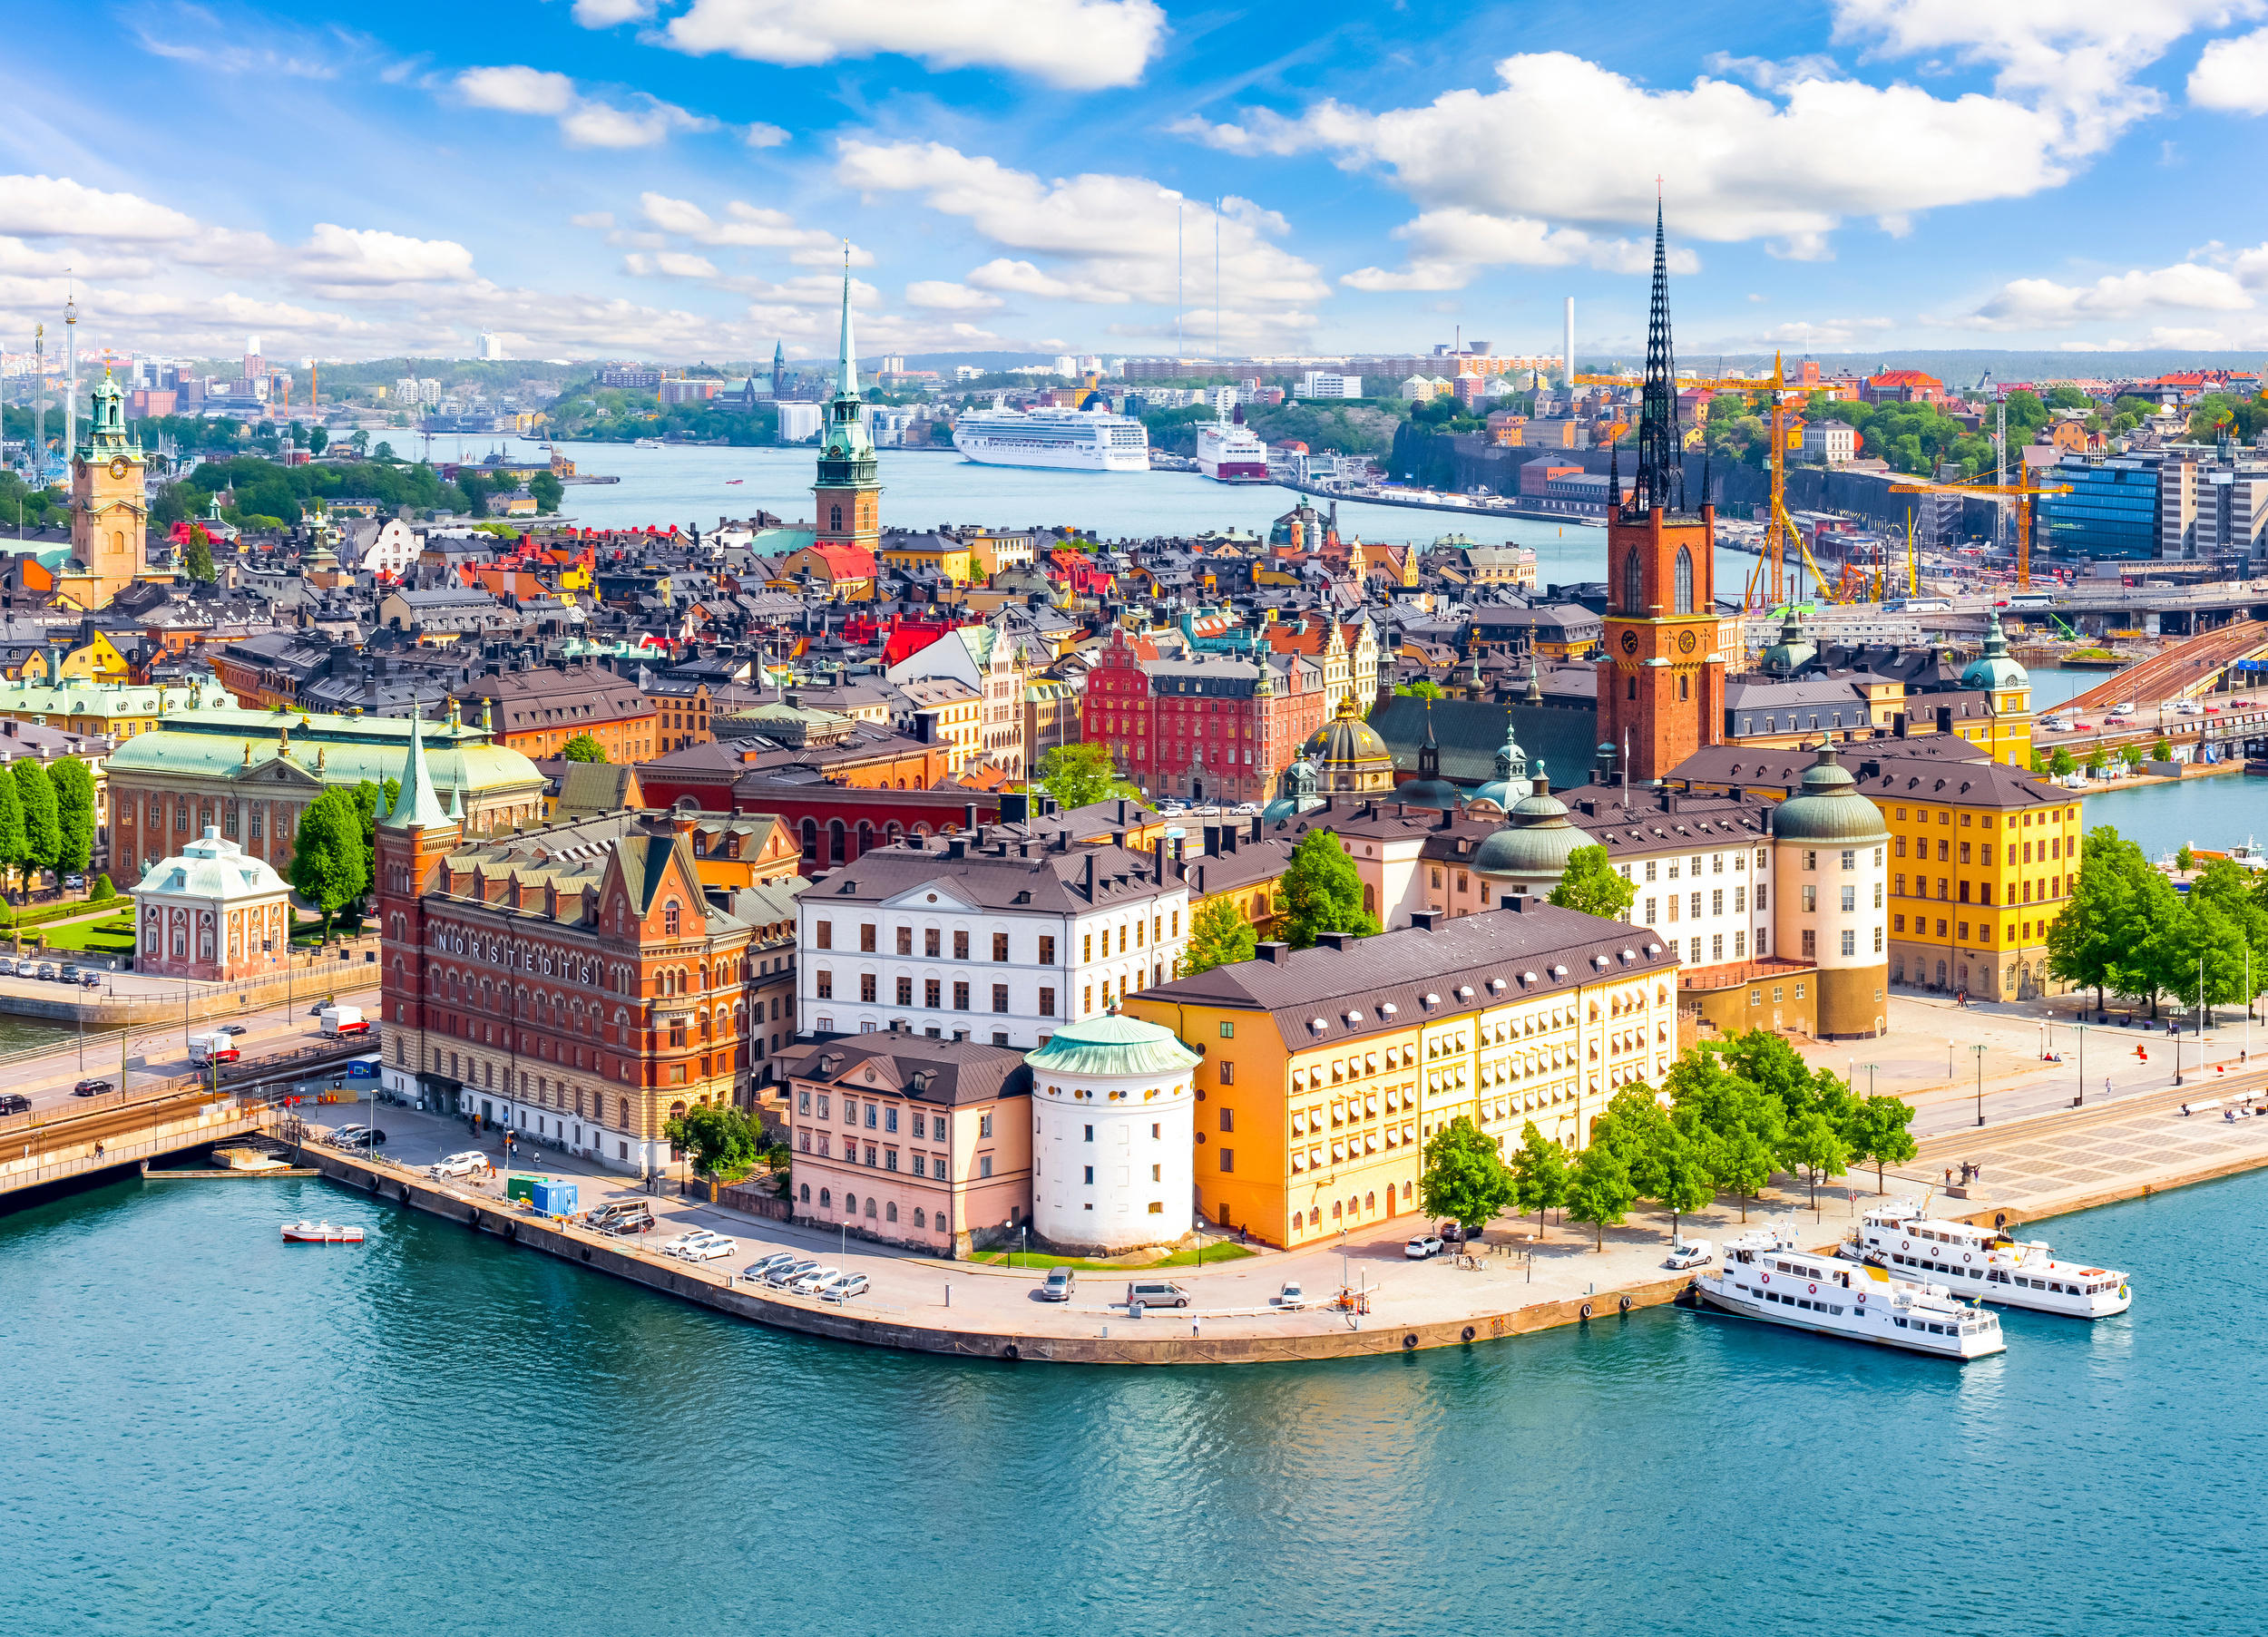 <p>Unless you really like frigid walks and bundling up, it’s most advisable to visit Stockholm in the summer months. Then, you can make the most out of rambling around the Scandinavian city in the sun and enjoying fika (Swedish coffee break) afterward.</p><p>You may also like: <a href='https://www.yardbarker.com/lifestyle/articles/20_additions_that_will_make_your_blt_even_tastier_100523/s1__26177438'>20 additions that will make your BLT even tastier</a></p>